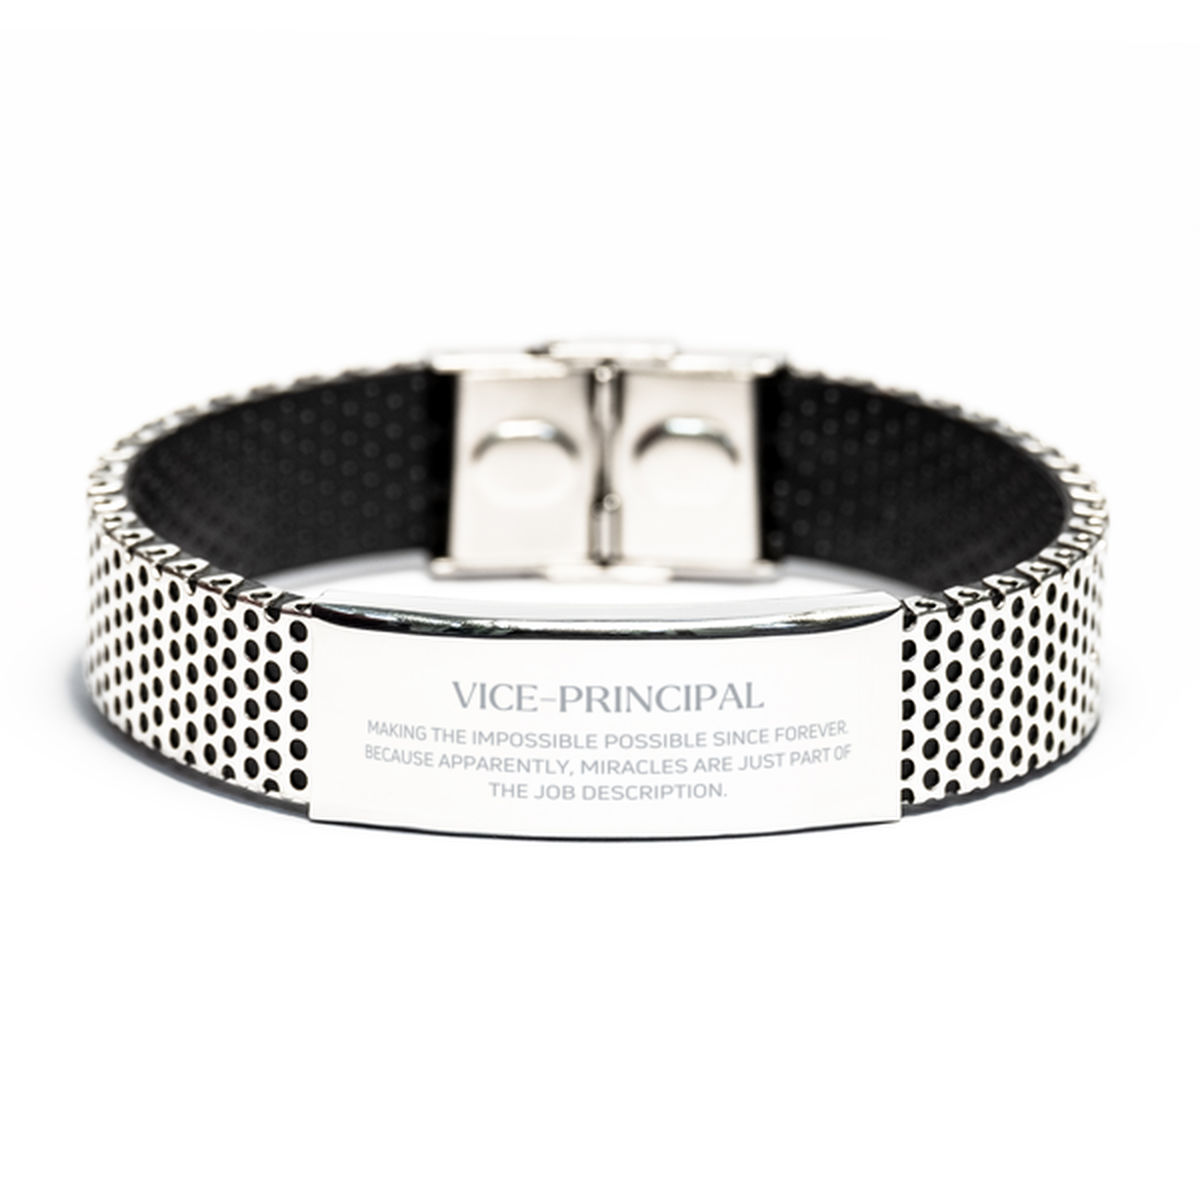 Funny Vice-principal Gifts, Miracles are just part of the job description, Inspirational Birthday Stainless Steel Bracelet For Vice-principal, Men, Women, Coworkers, Friends, Boss